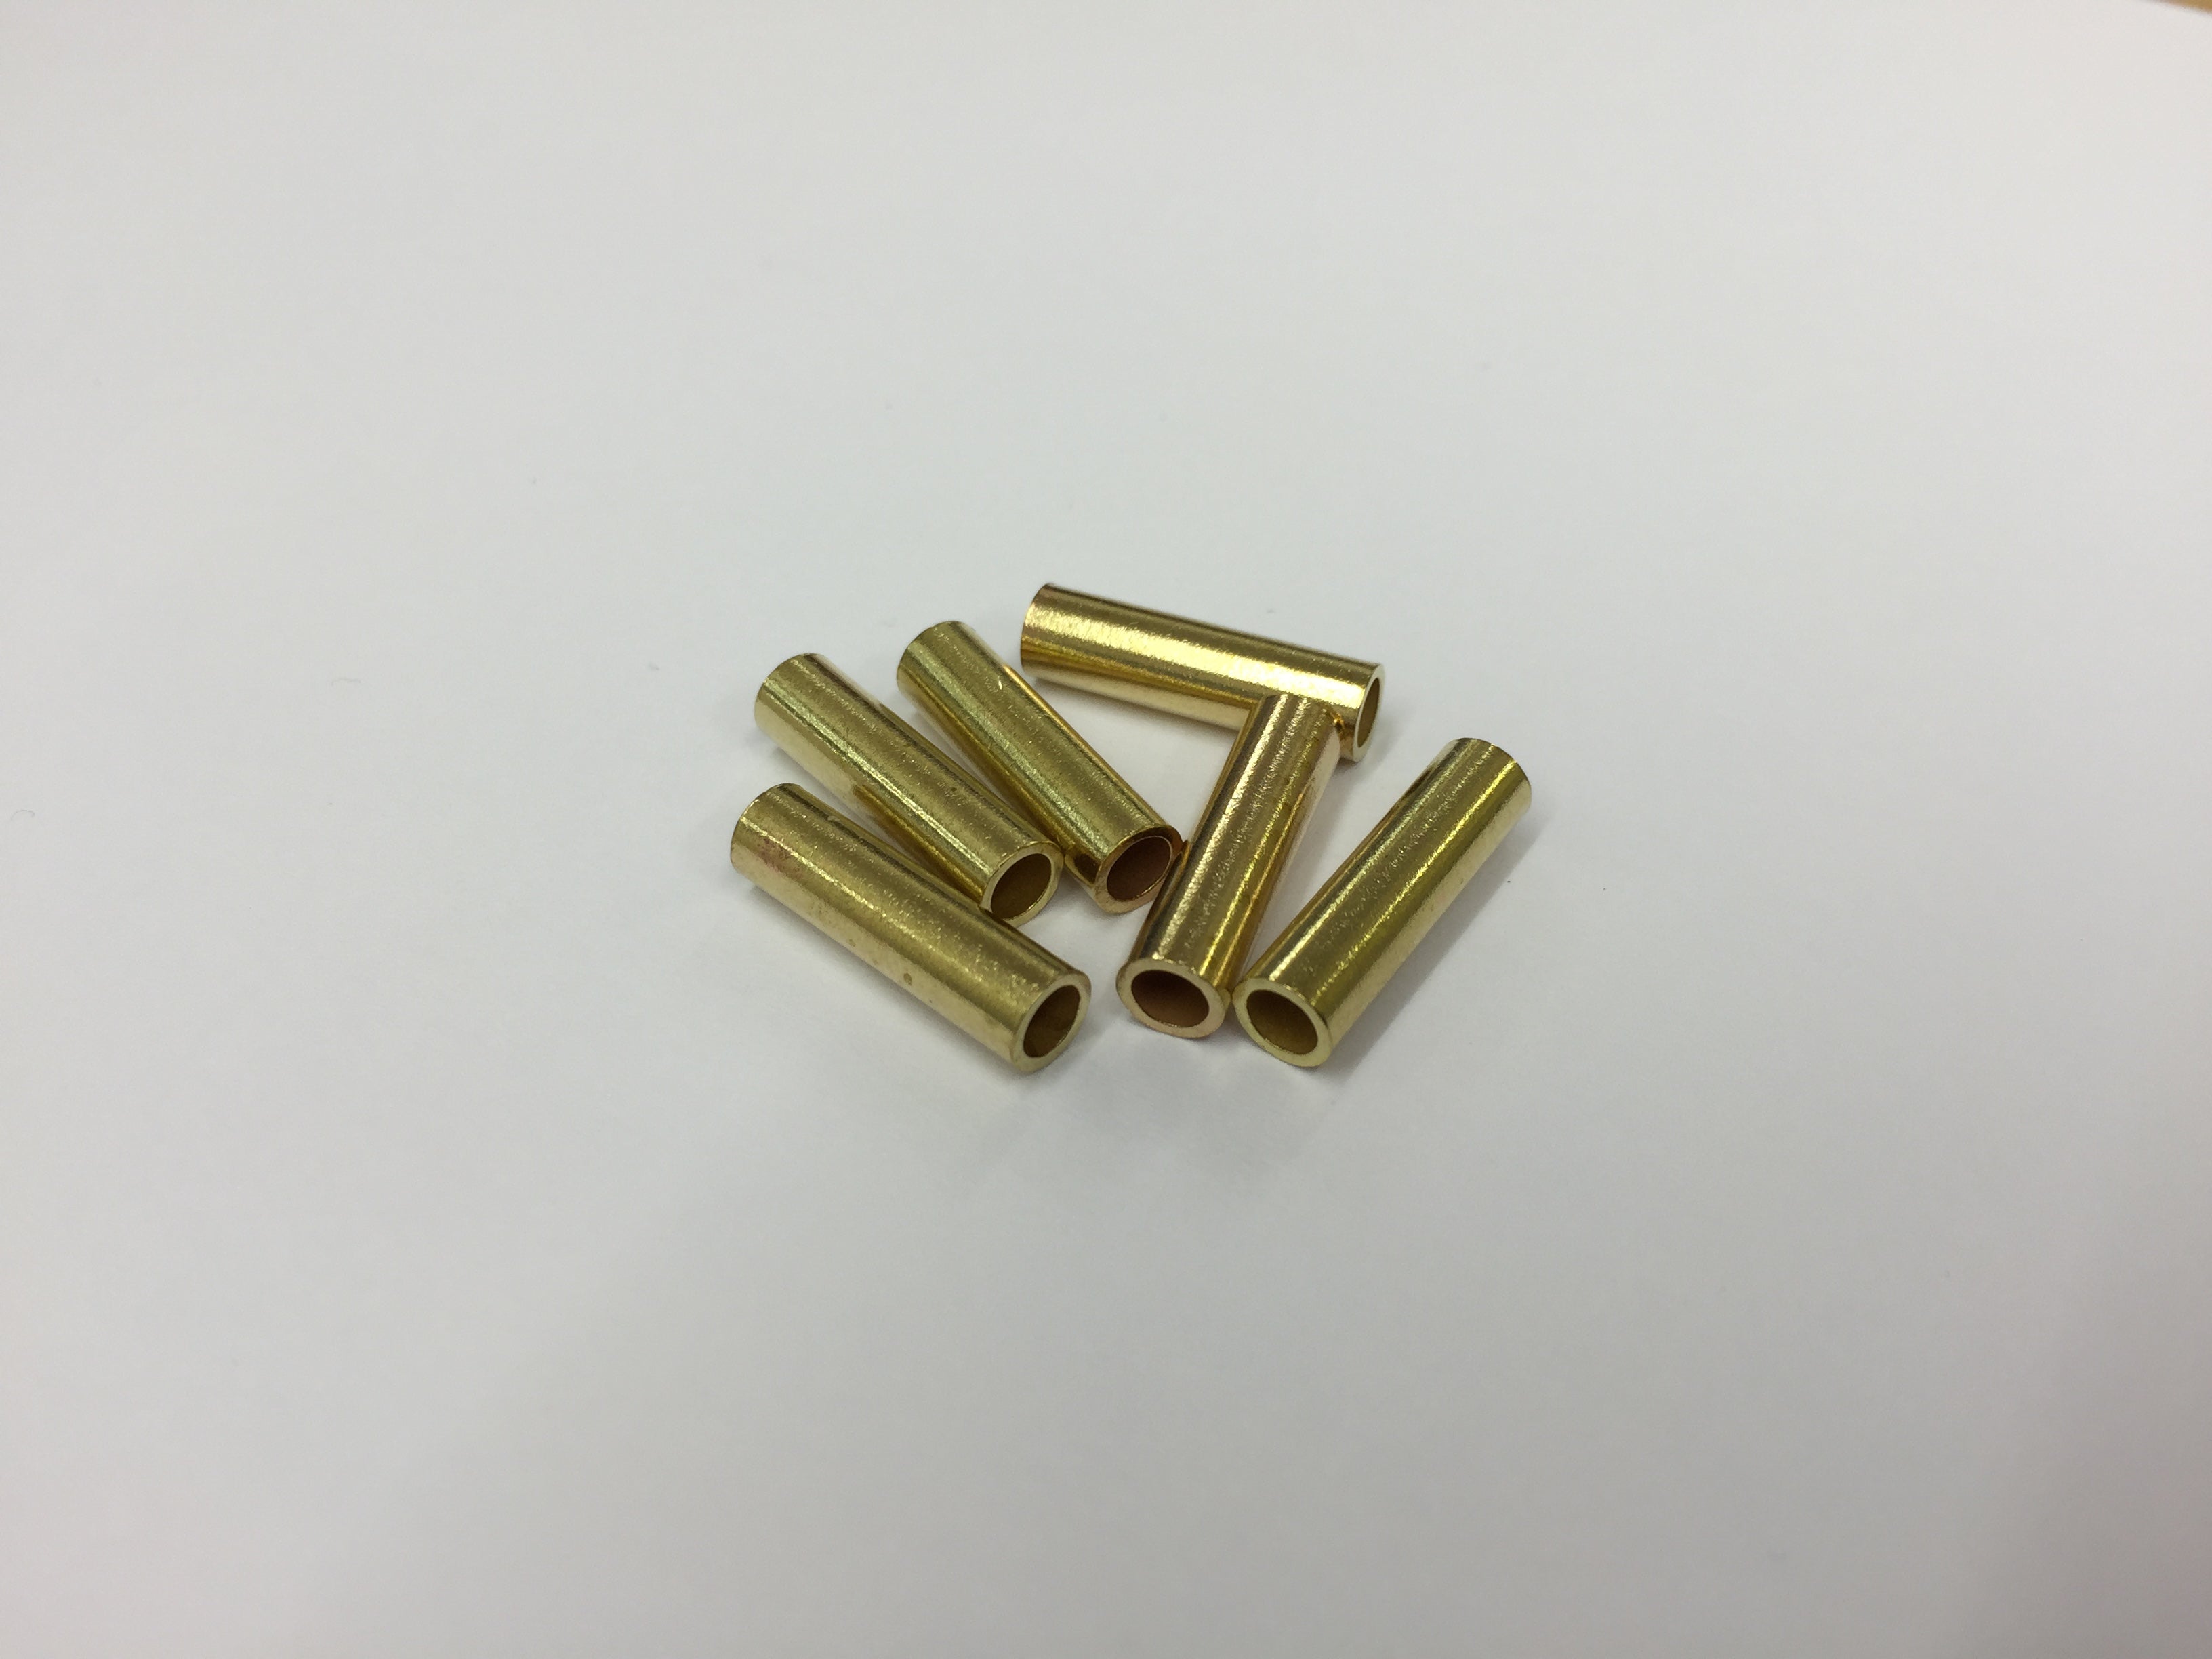 Crimping Ferrule for 1.5mm Nylon trace wire - Brass 6 Pack